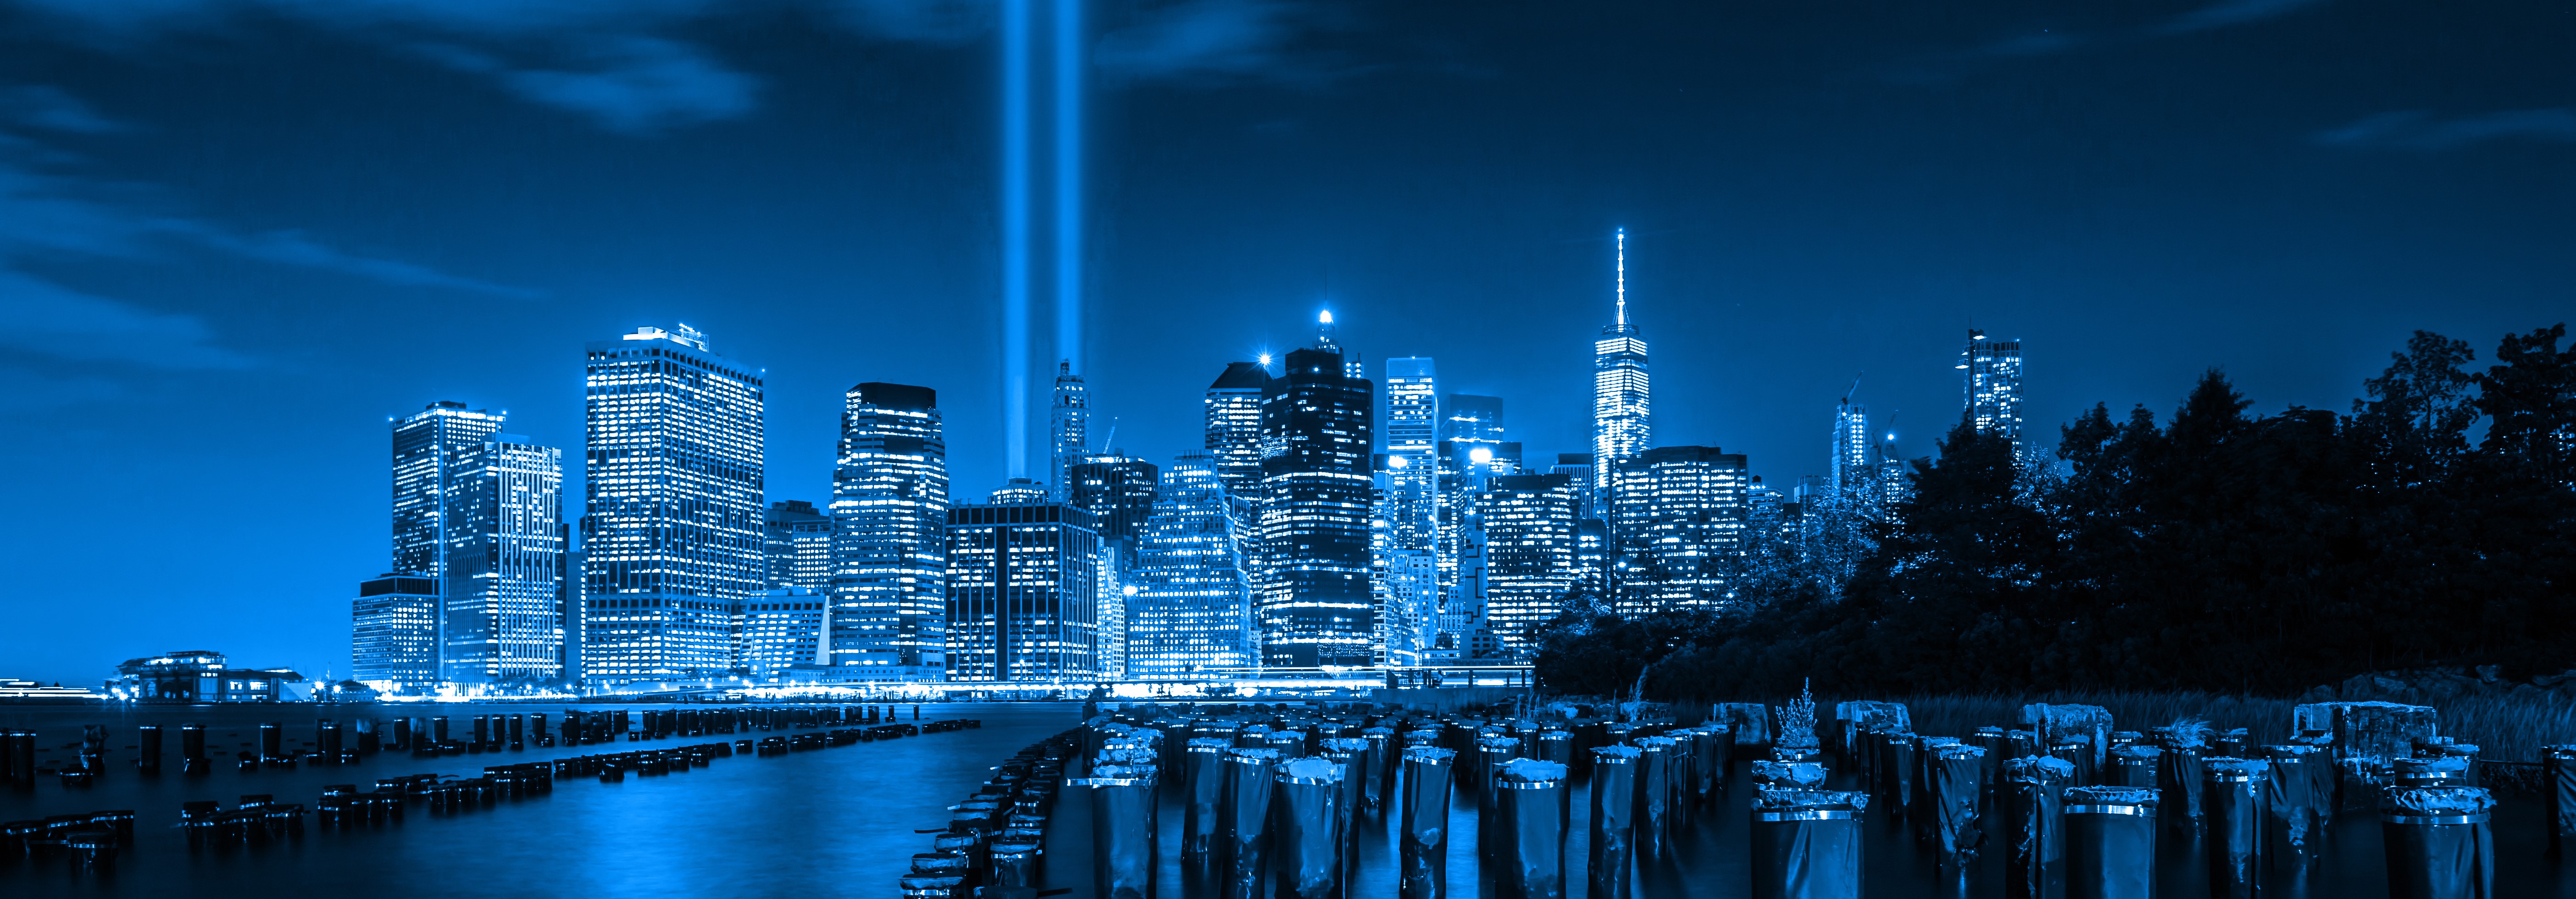 9/11 Research and Remembrance Project